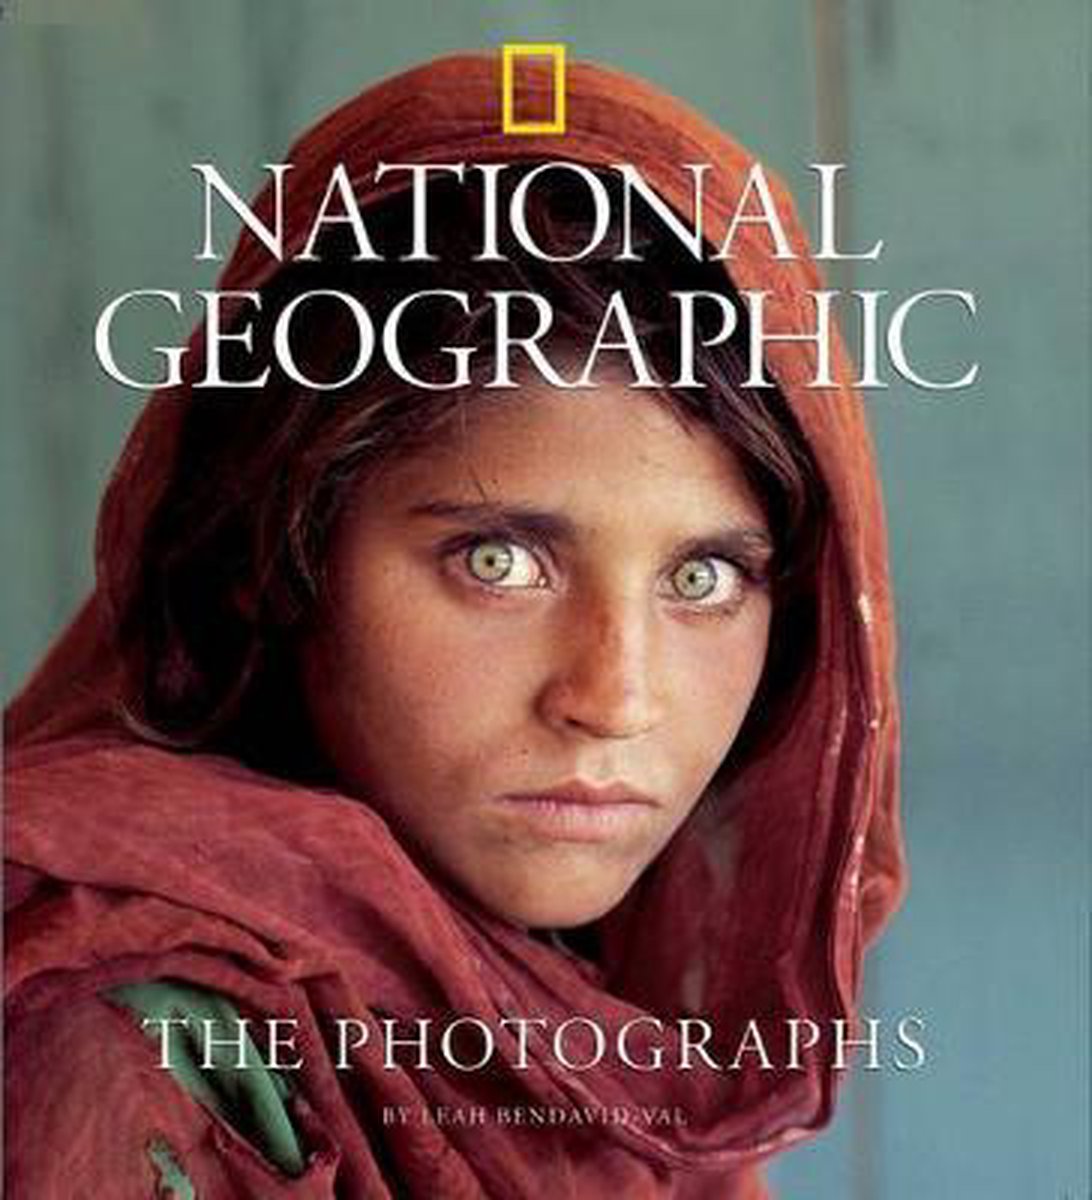 National Geographic The Photographs by Leah Bendavid-Val